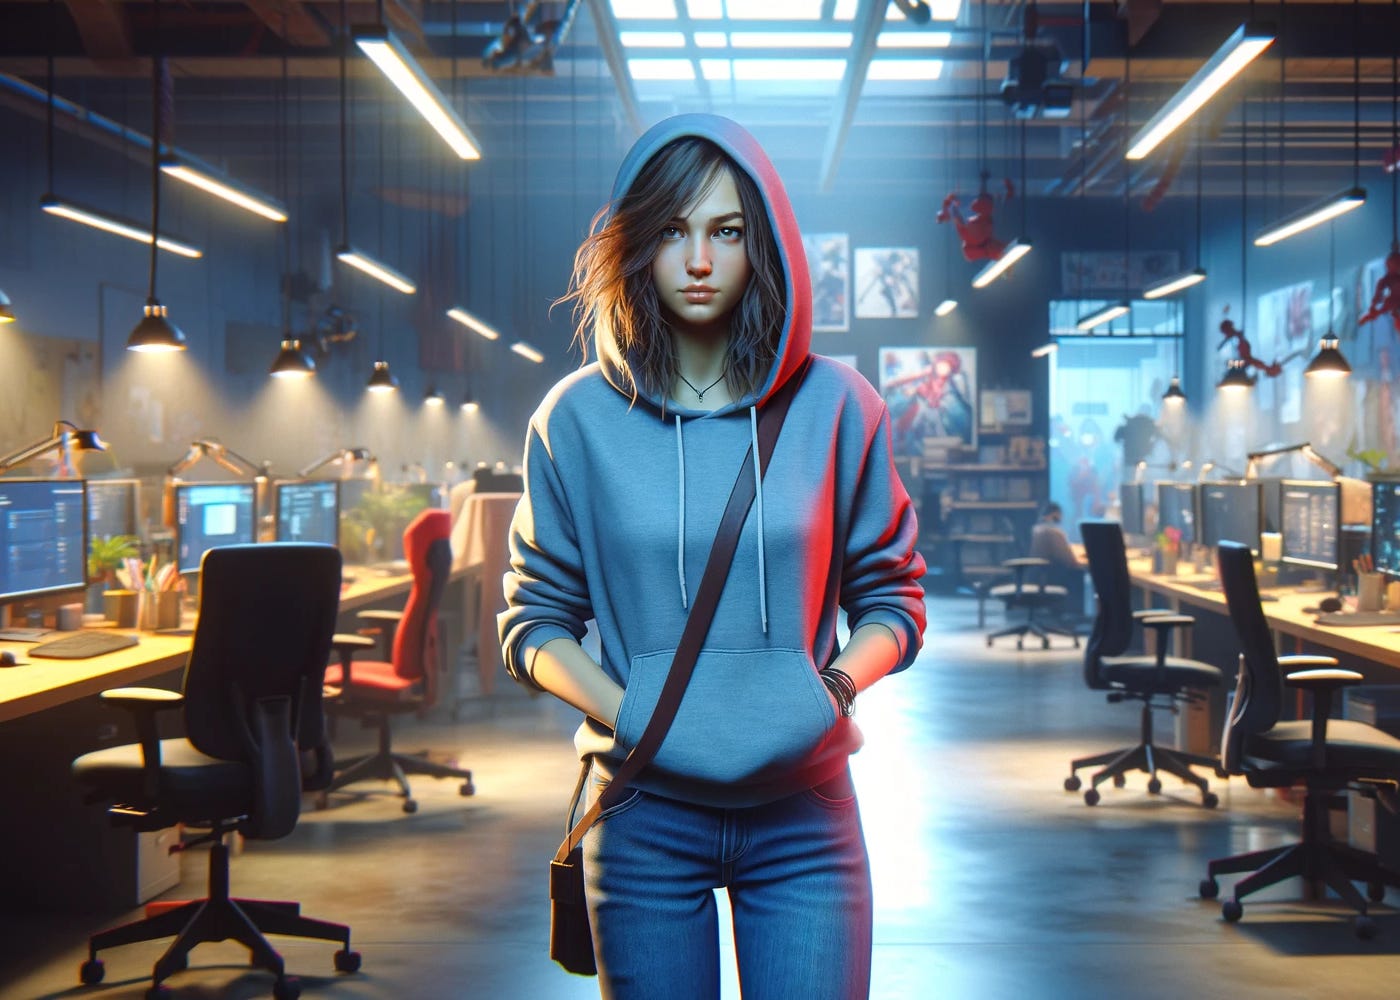 Digital art of a young woman in a blue hoodie and jeans standing in a modern game development studio, with computer workstations and game concept art in the background.